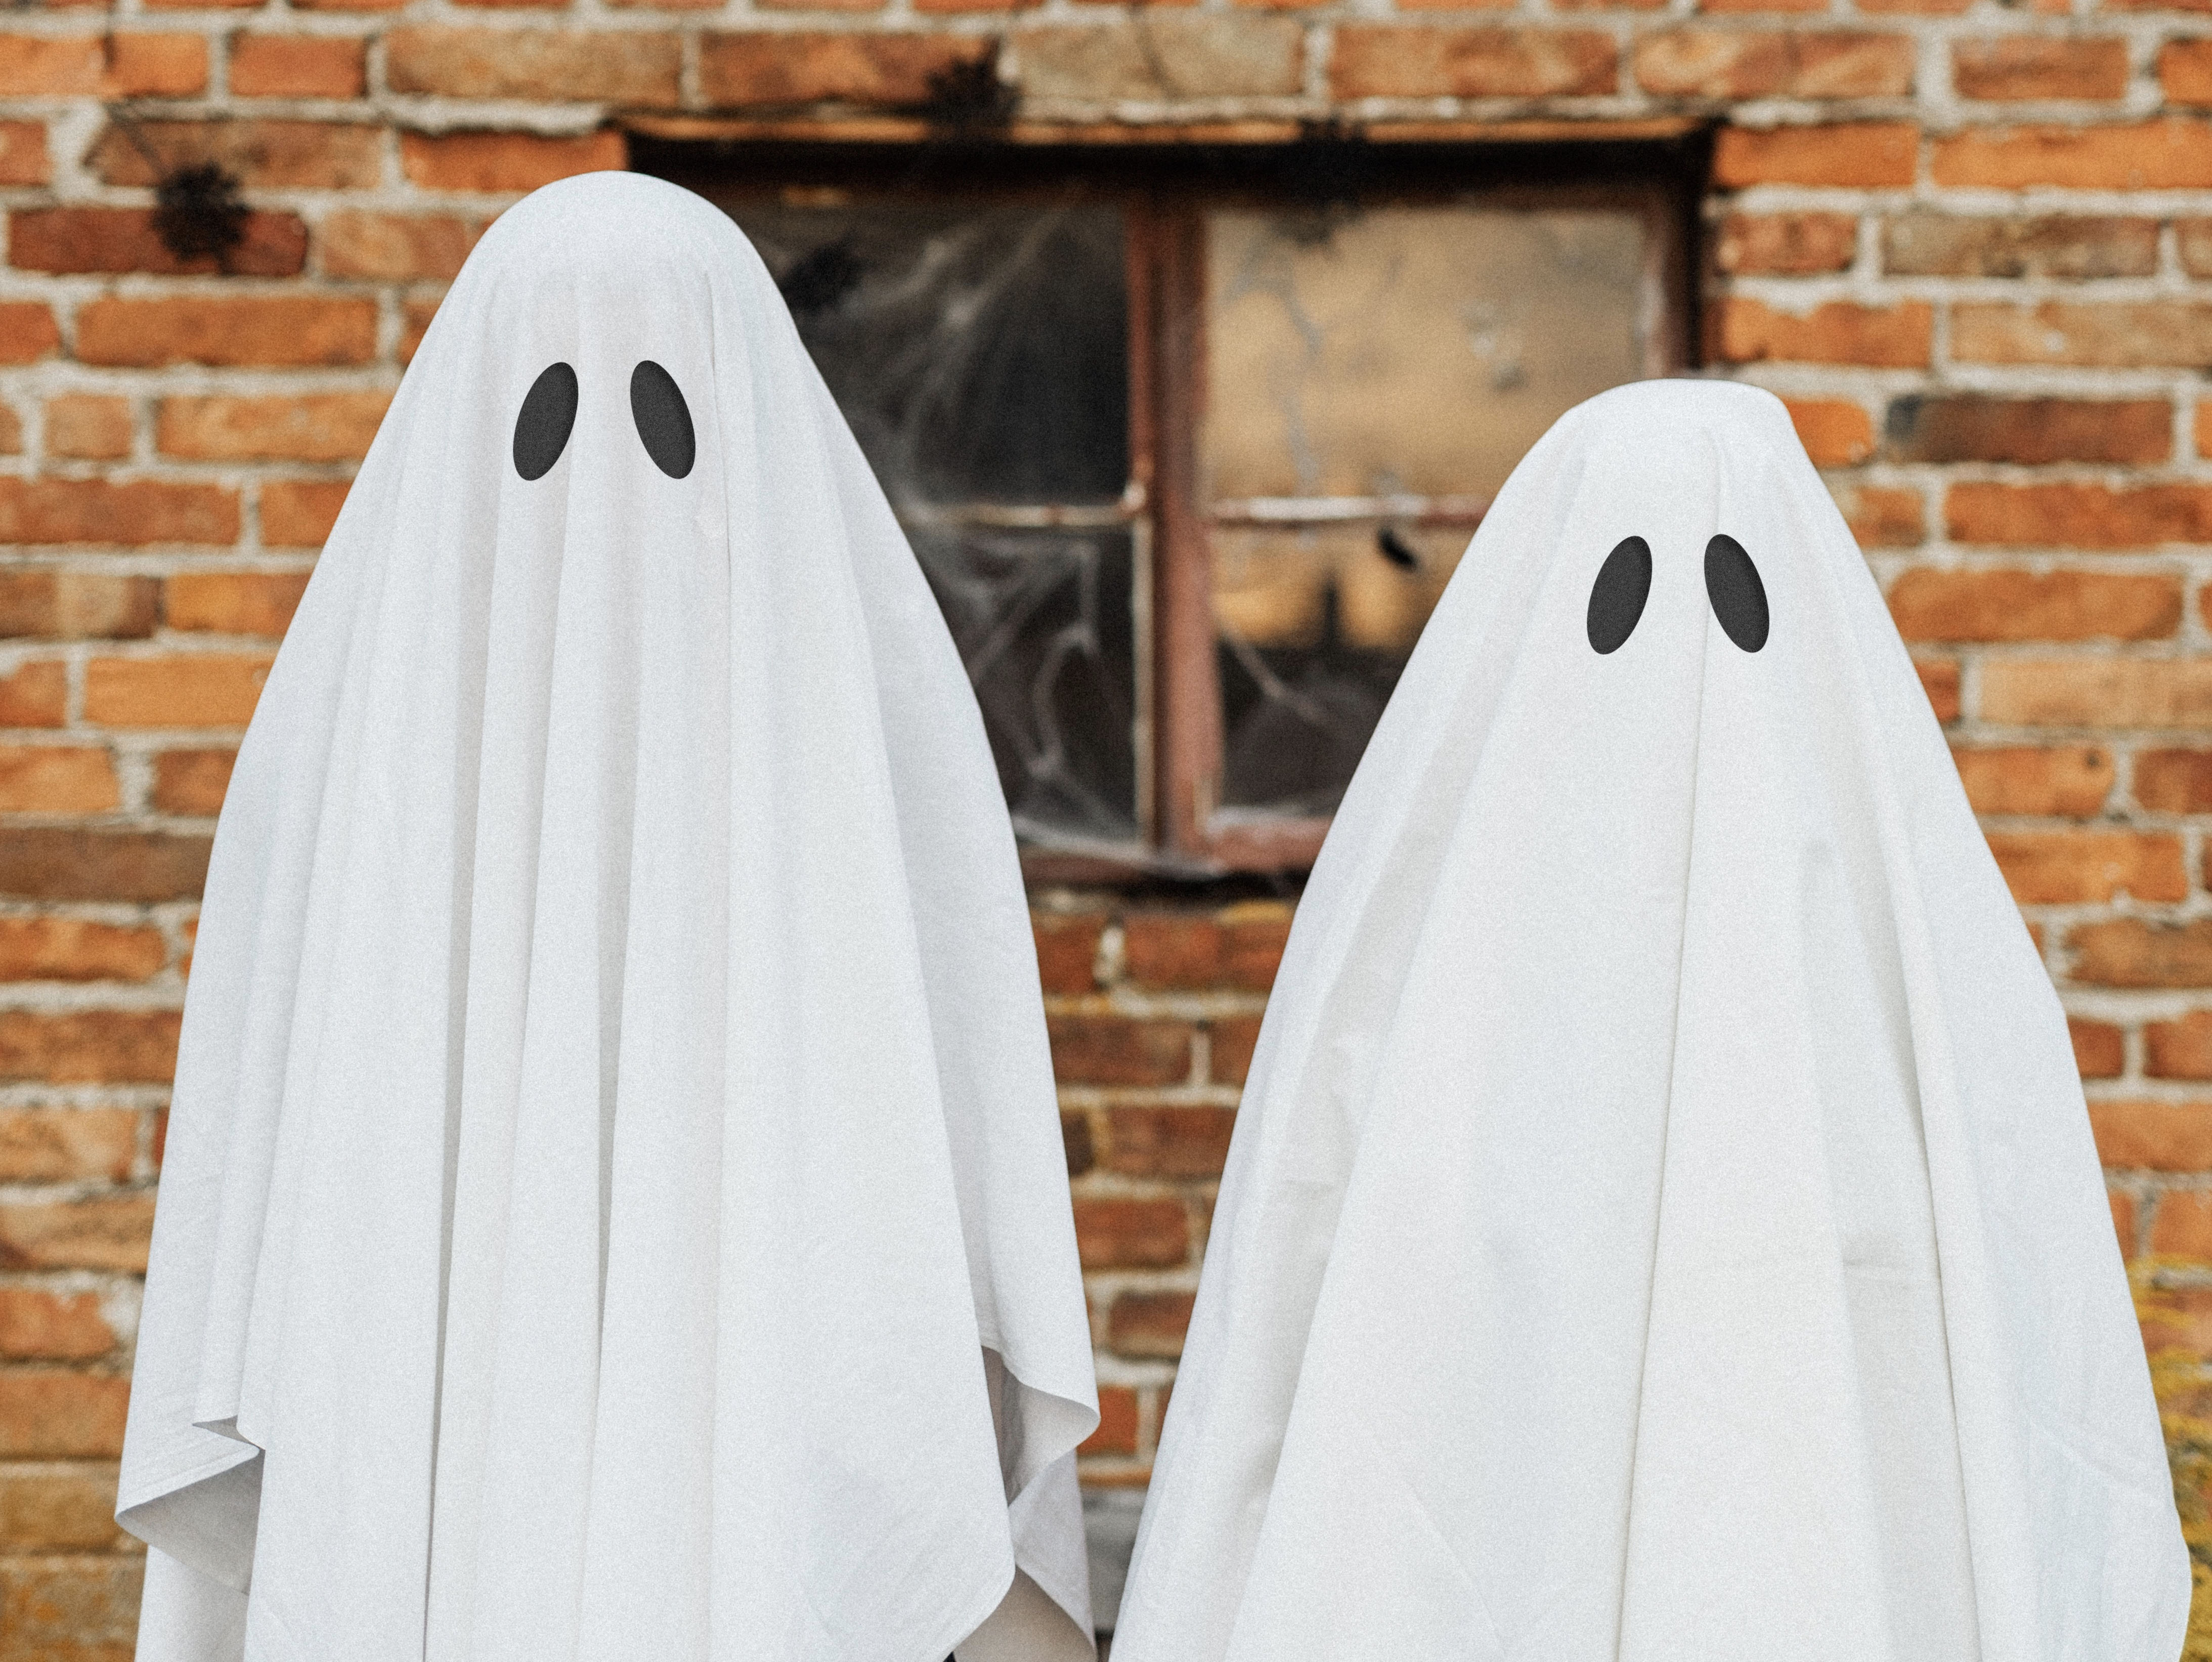 These tips from the Lancaster County Health Department will guide you on how to have a scary good time this October 31.